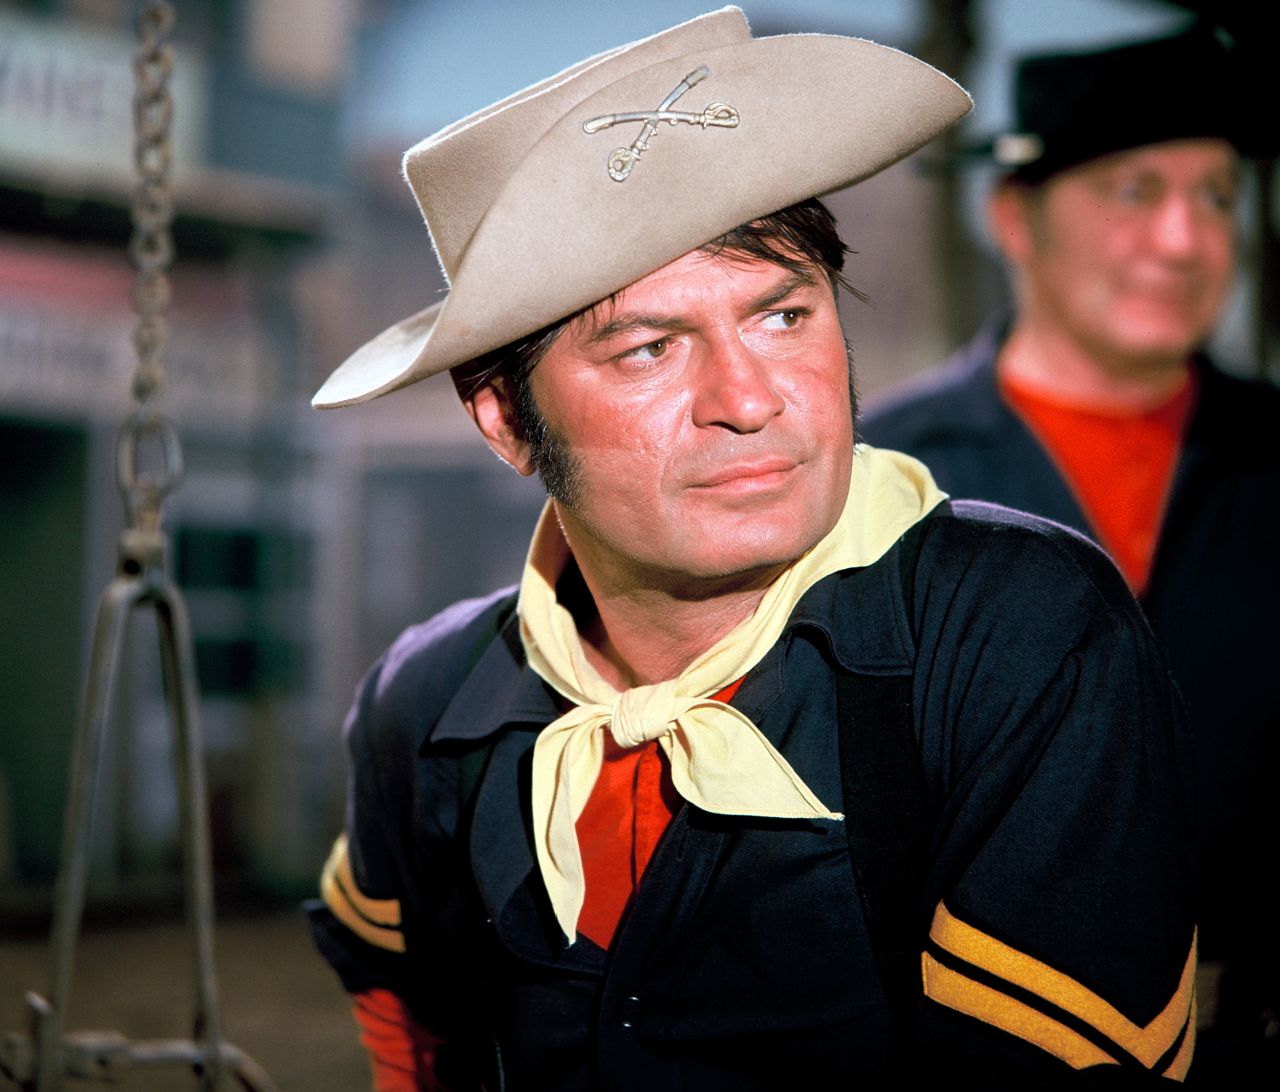 <a href="https://www.cnn.com/2022/07/08/entertainment/larry-storch-obit/index.html" target="_blank">Larry Storch,</a> a television actor best known for his role in the '60s sitcom "F Troop," died on June 7, according to a statement shared by his family on Facebook. He was 99.